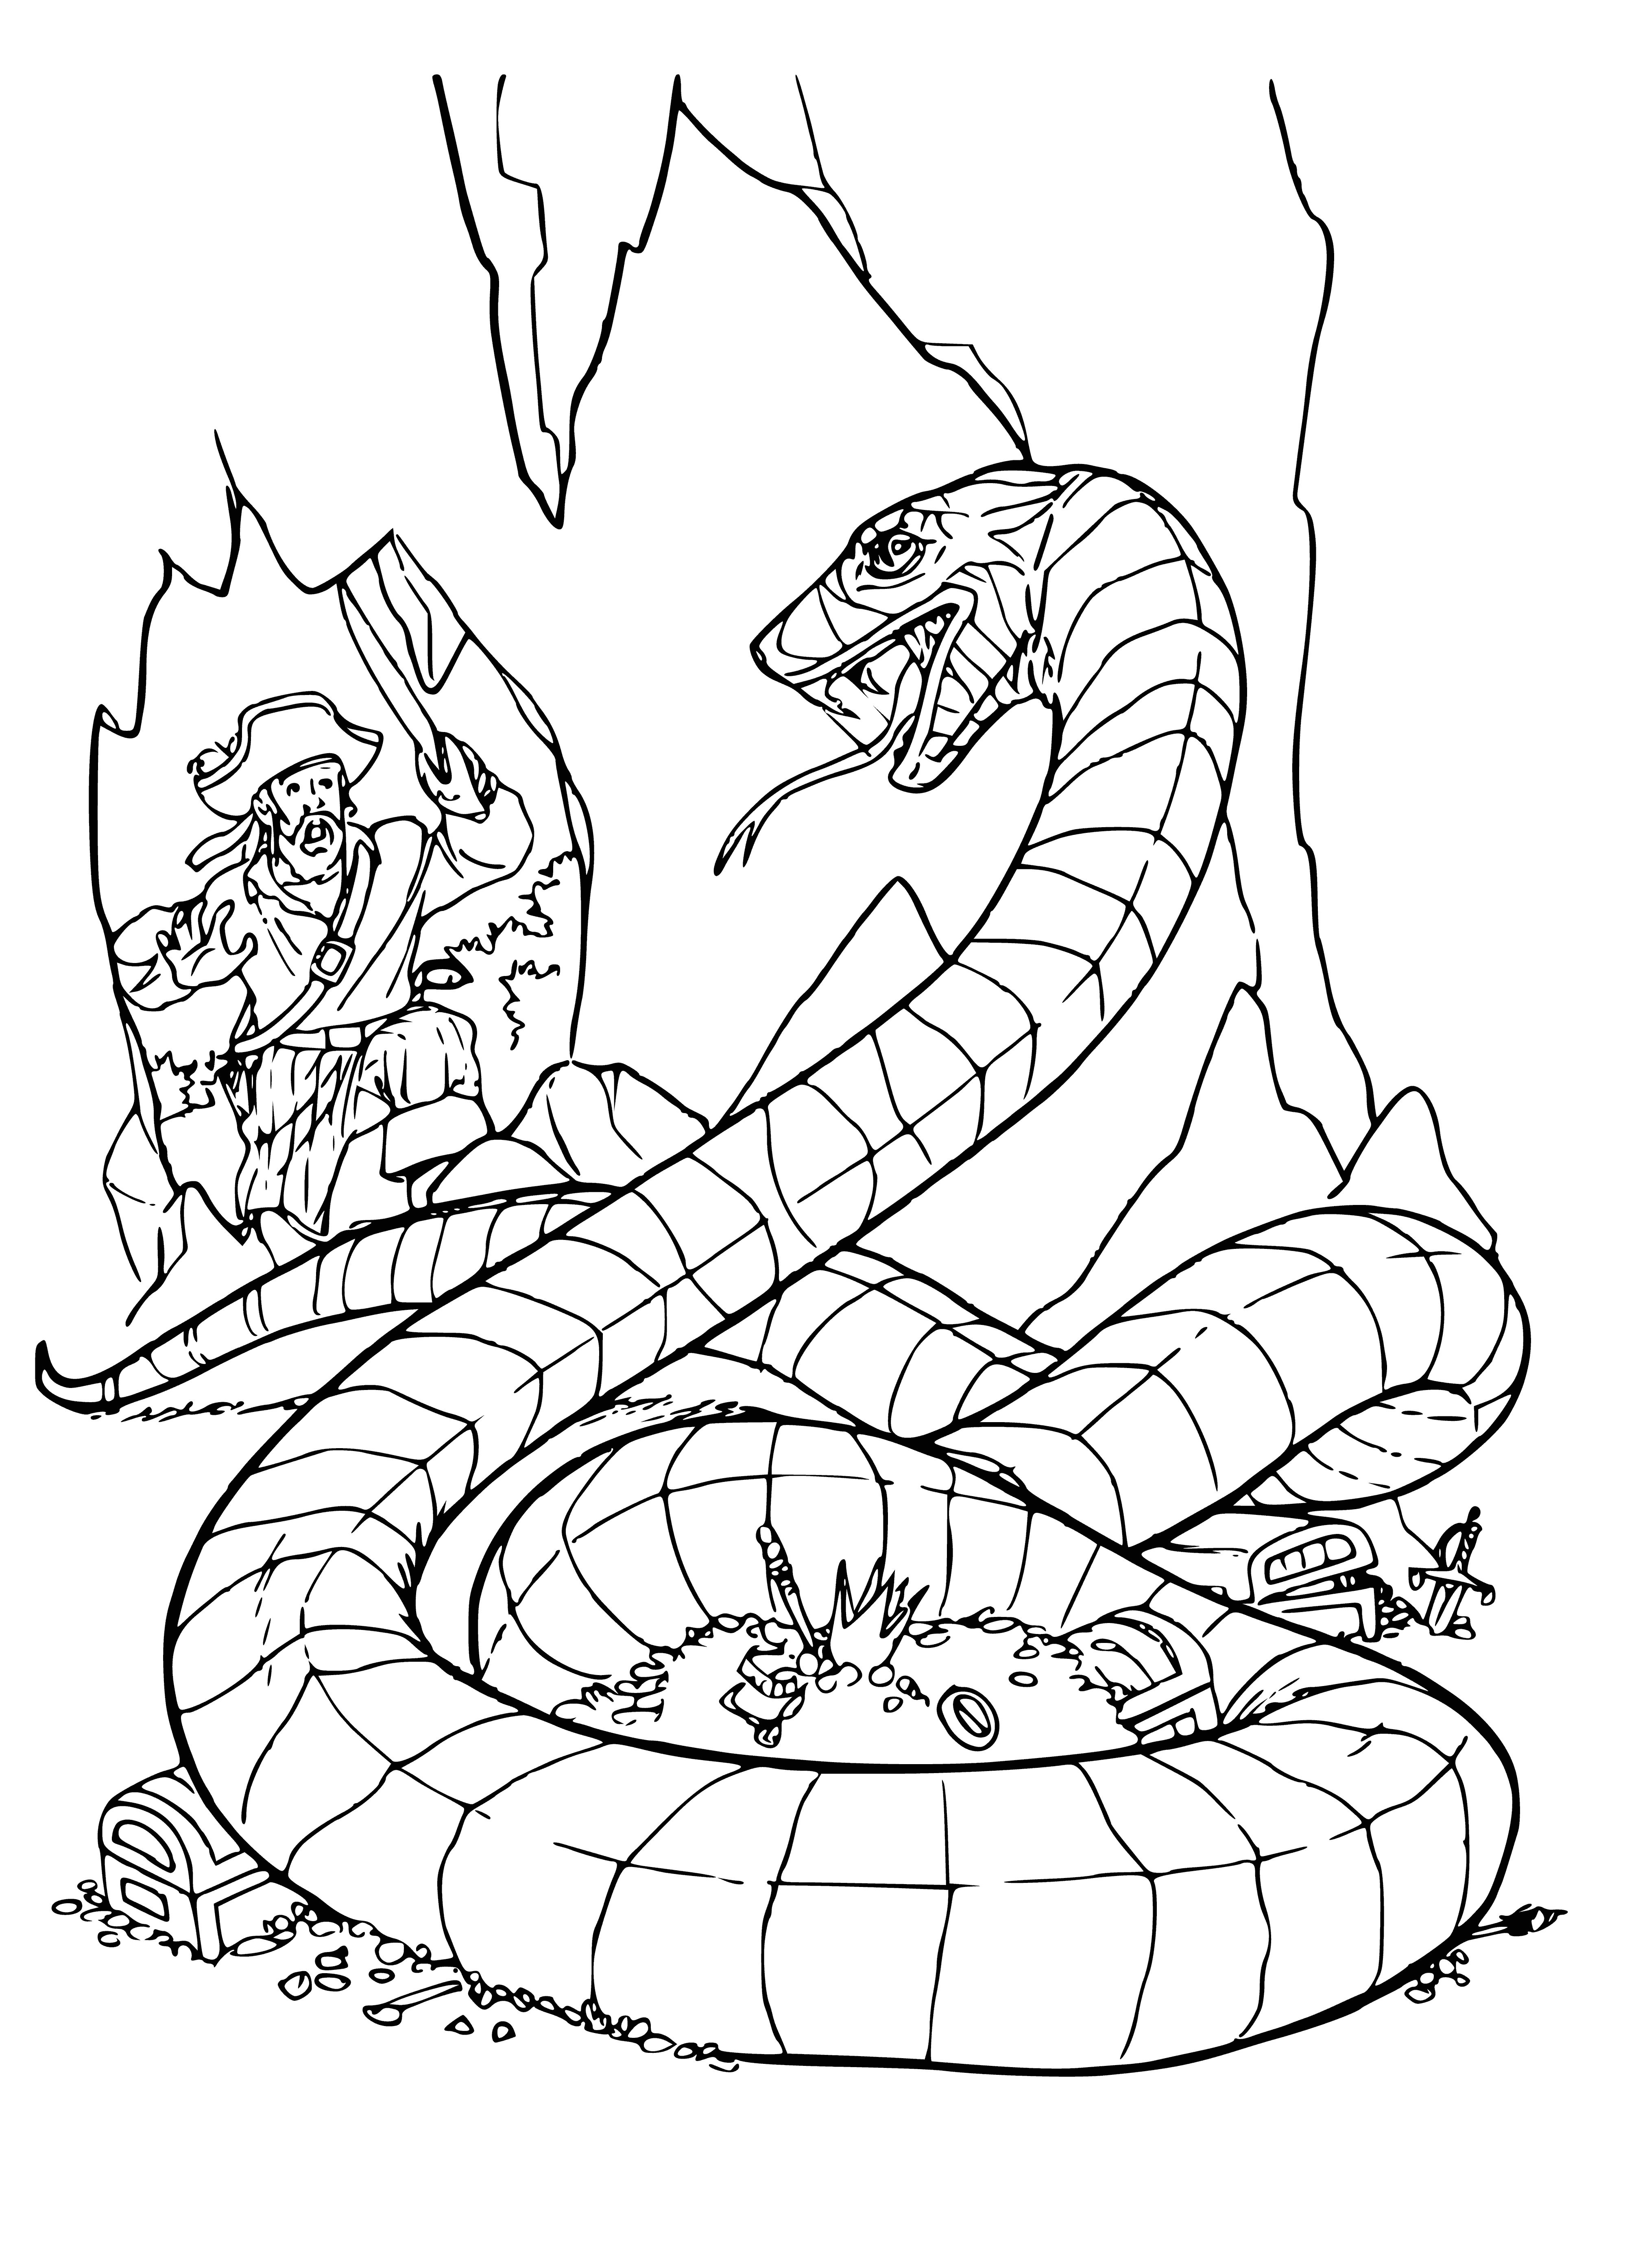 coloring page: Giant snake coils around tree, menacing eyes flashing and tongue flickering, looking ready to strike.